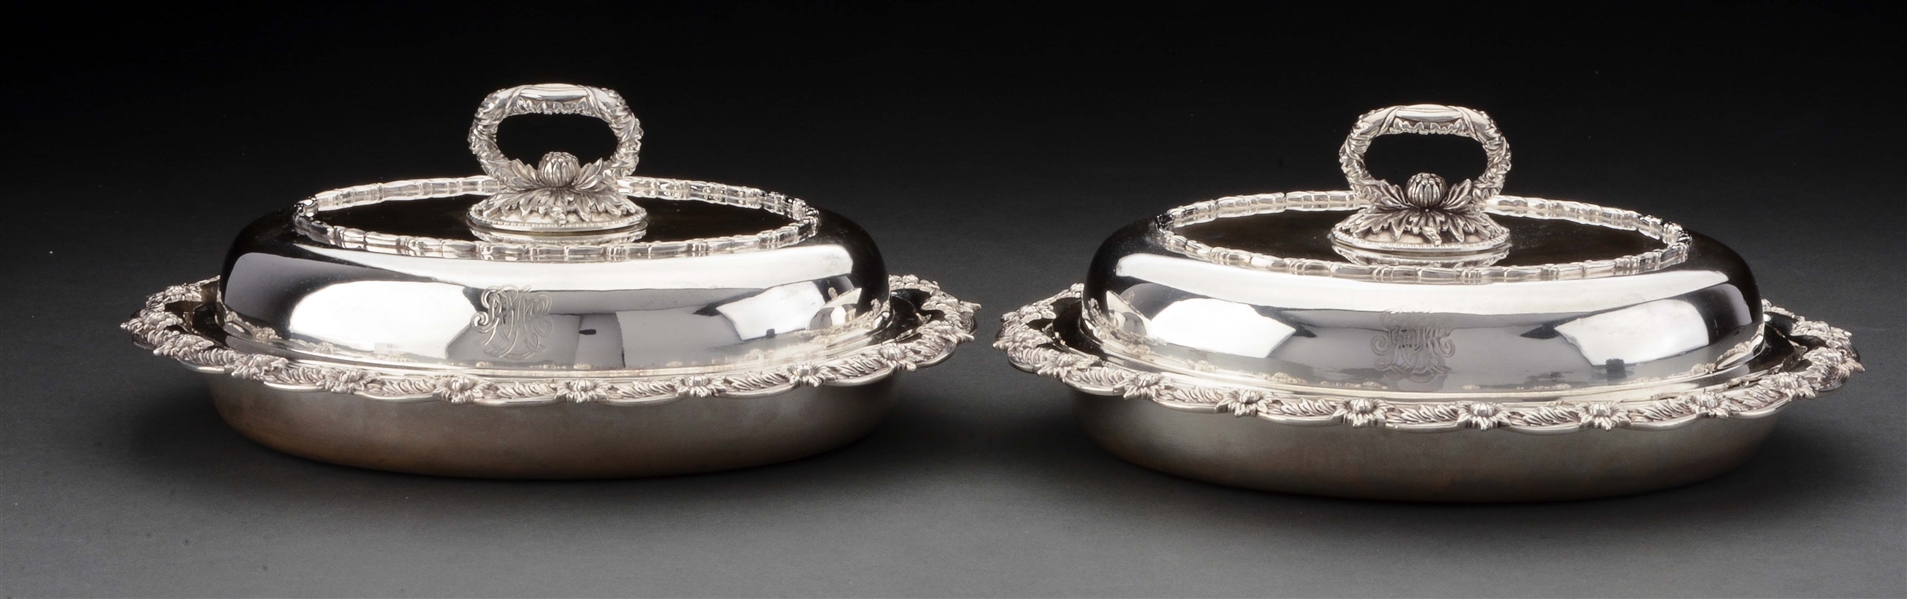 PAIR OF TIFFANY STERLING COVERED VEGETABLE DISHES.